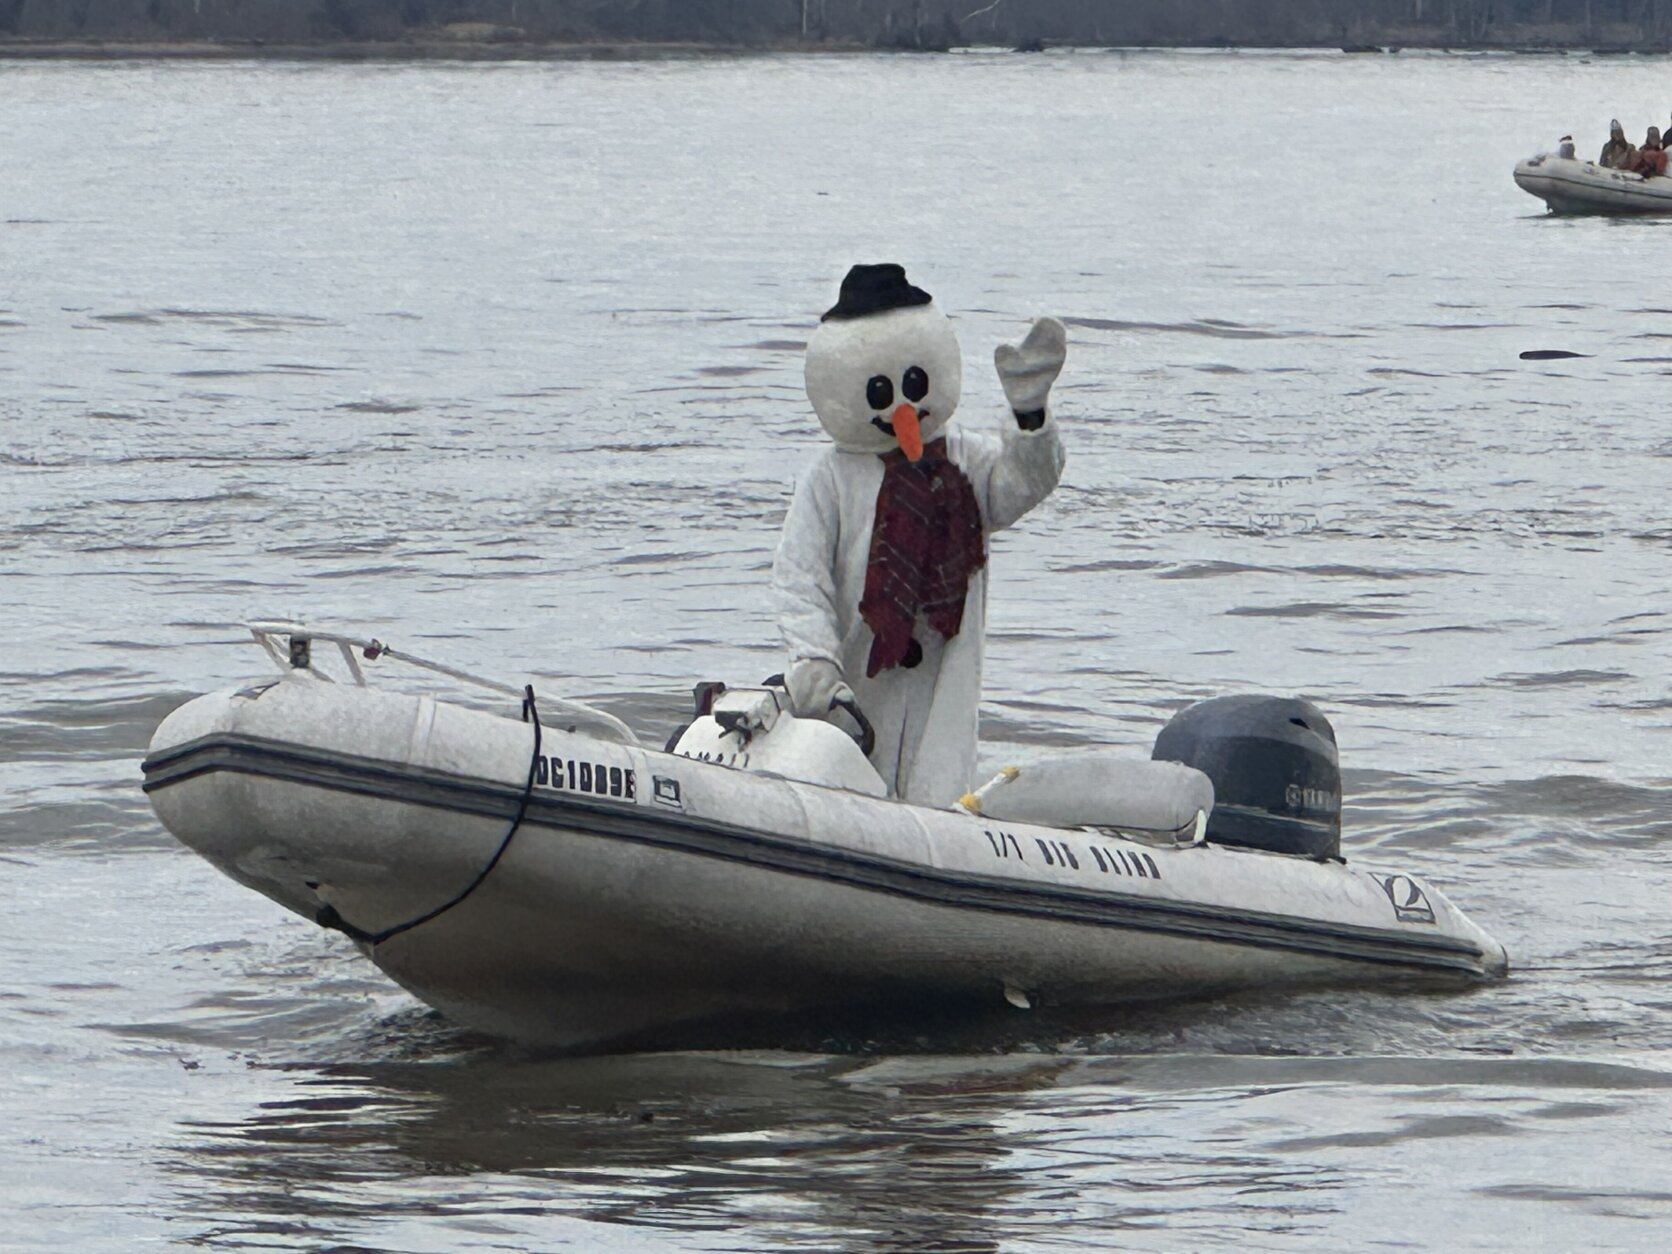 Snowman on a boat